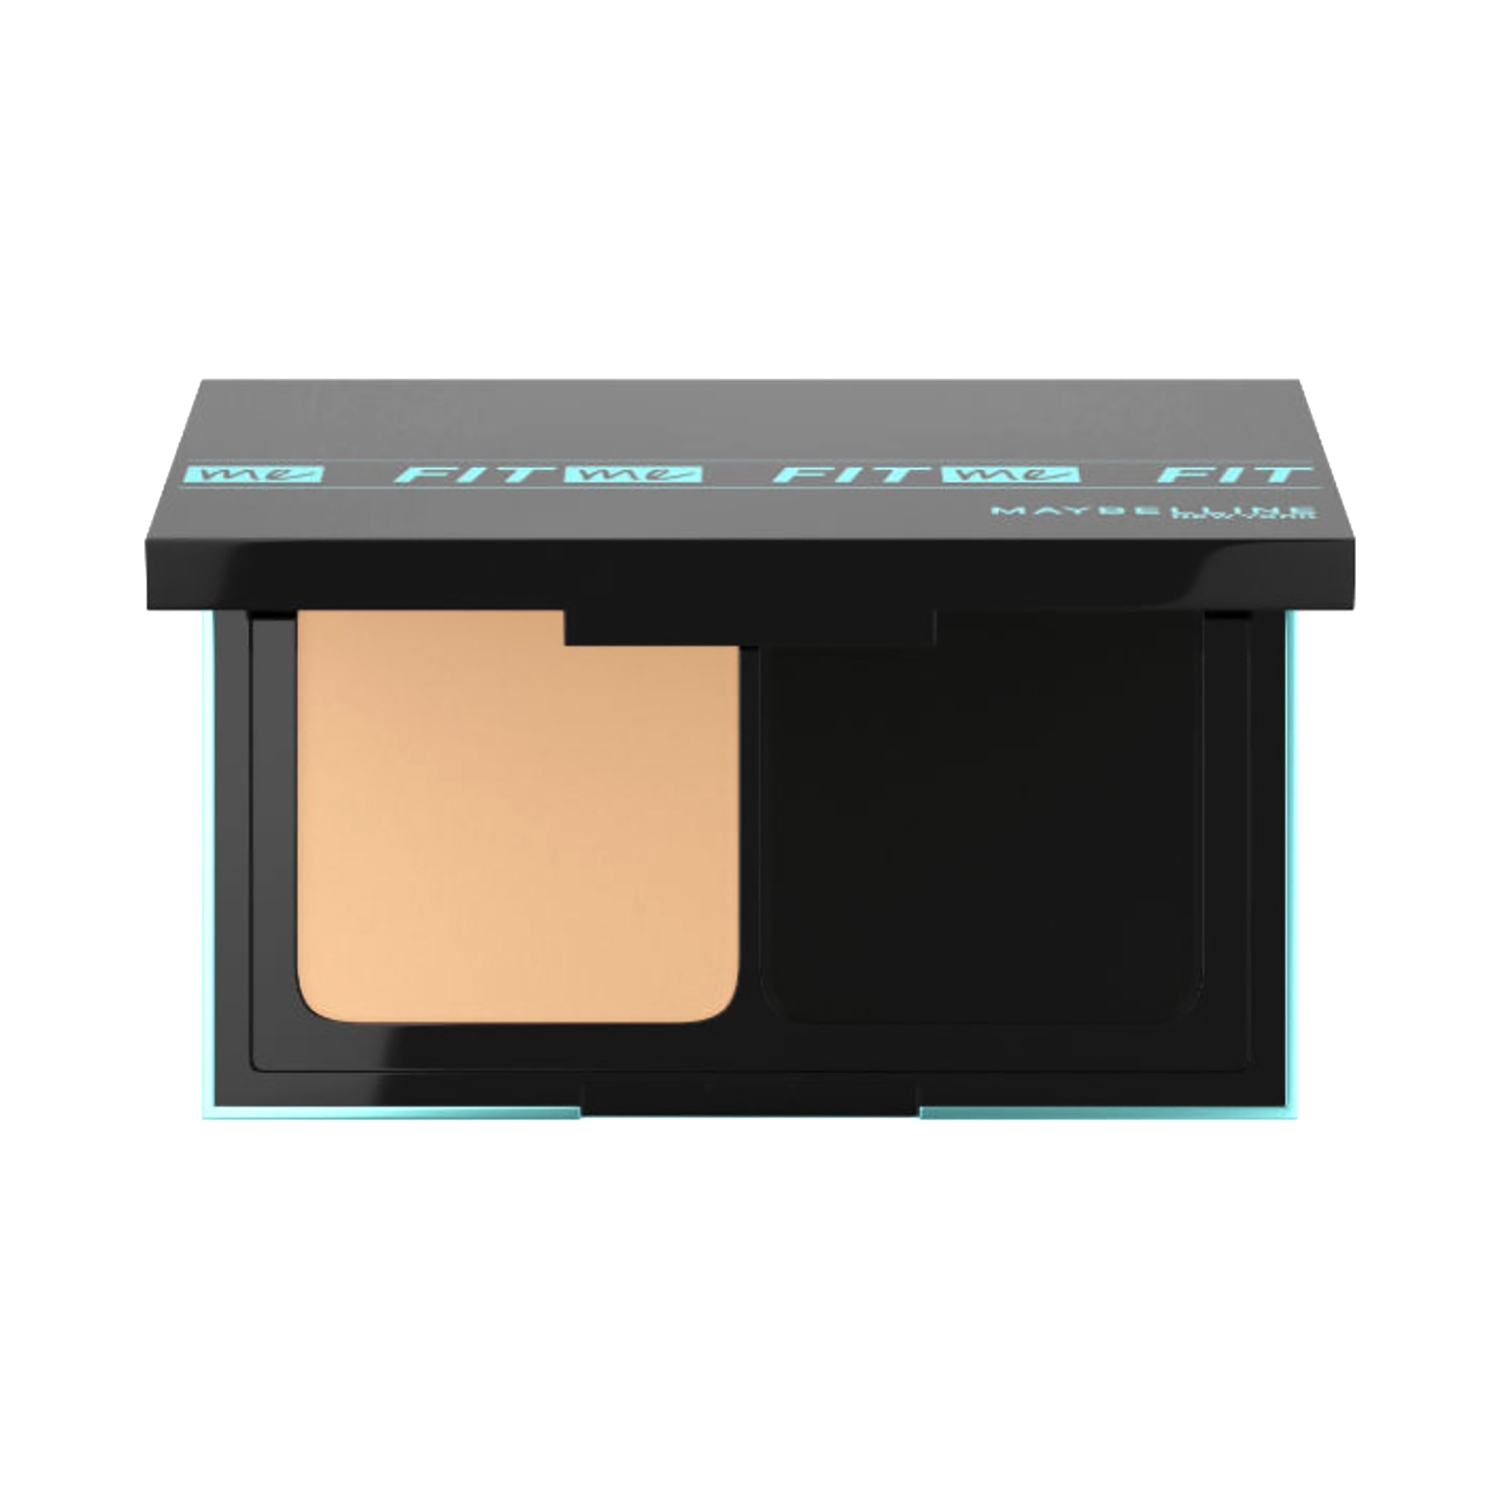 Maybelline New York | Maybelline New York Fit Me Ultimate Powder Foundation - Shade 128 (9g)